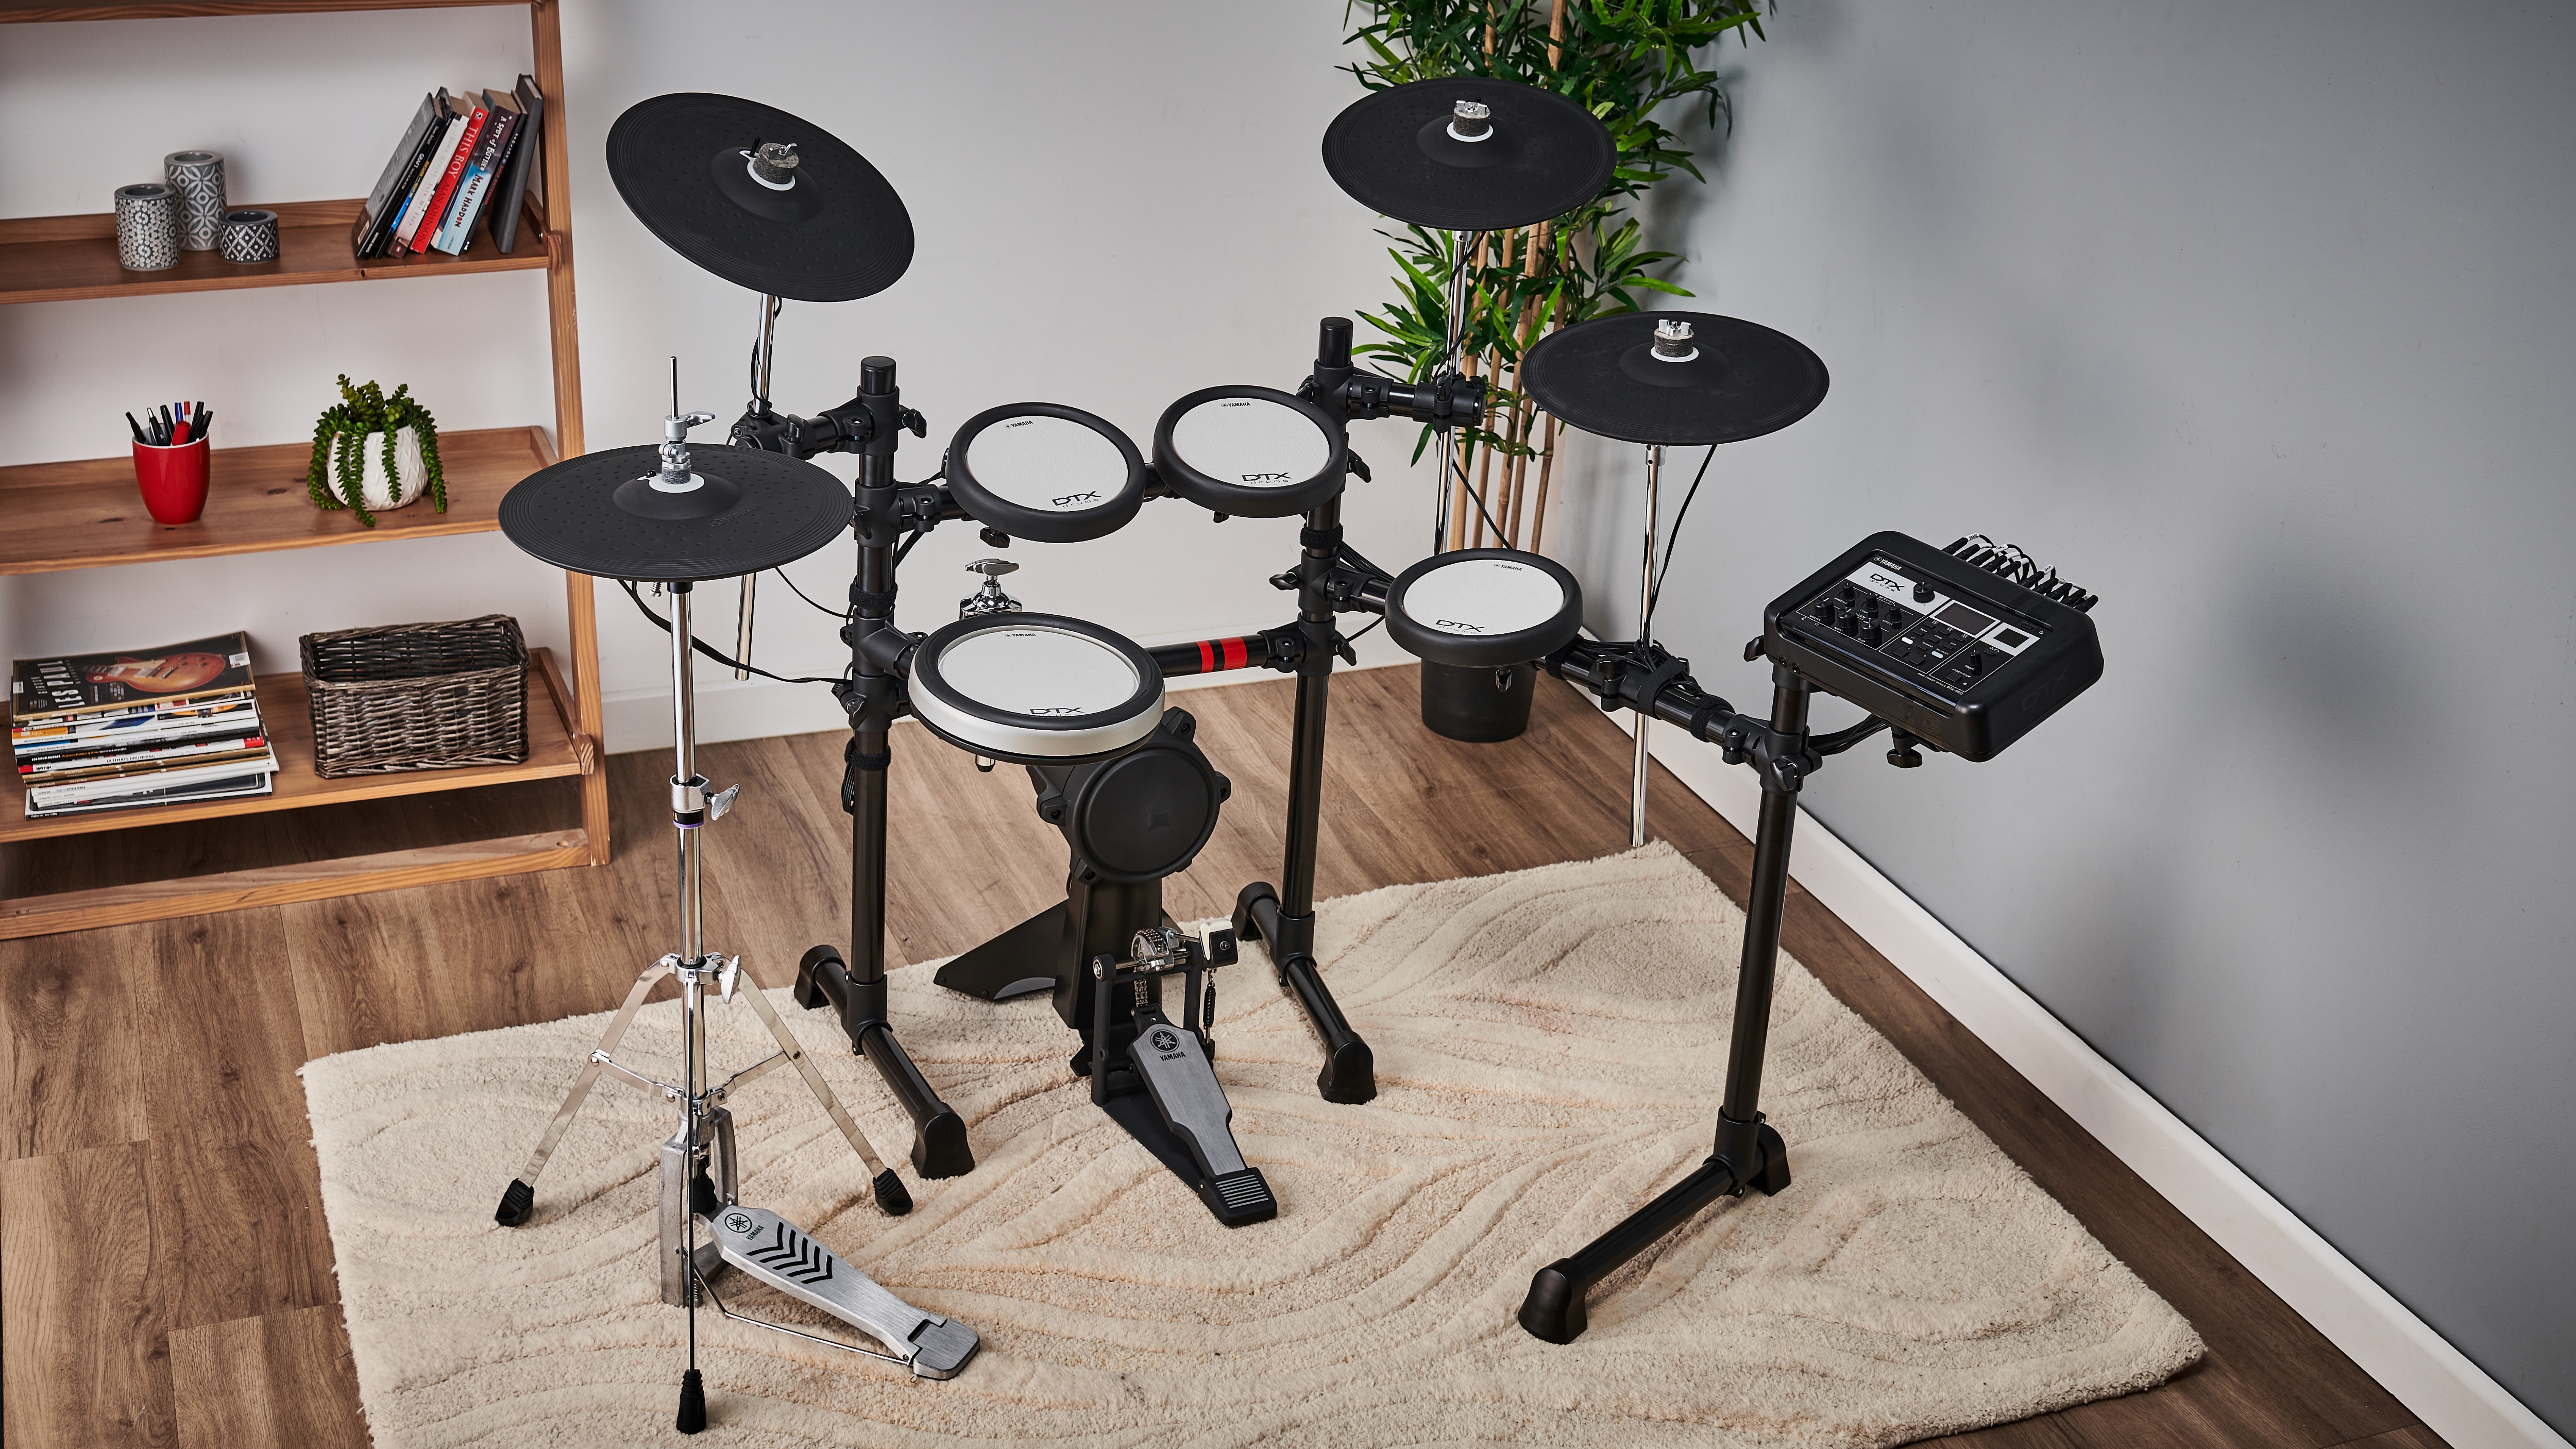 electronic drum set portable multi-function drummer for beginner drummers Supports adjustable volume and speed Foldable drum pad 